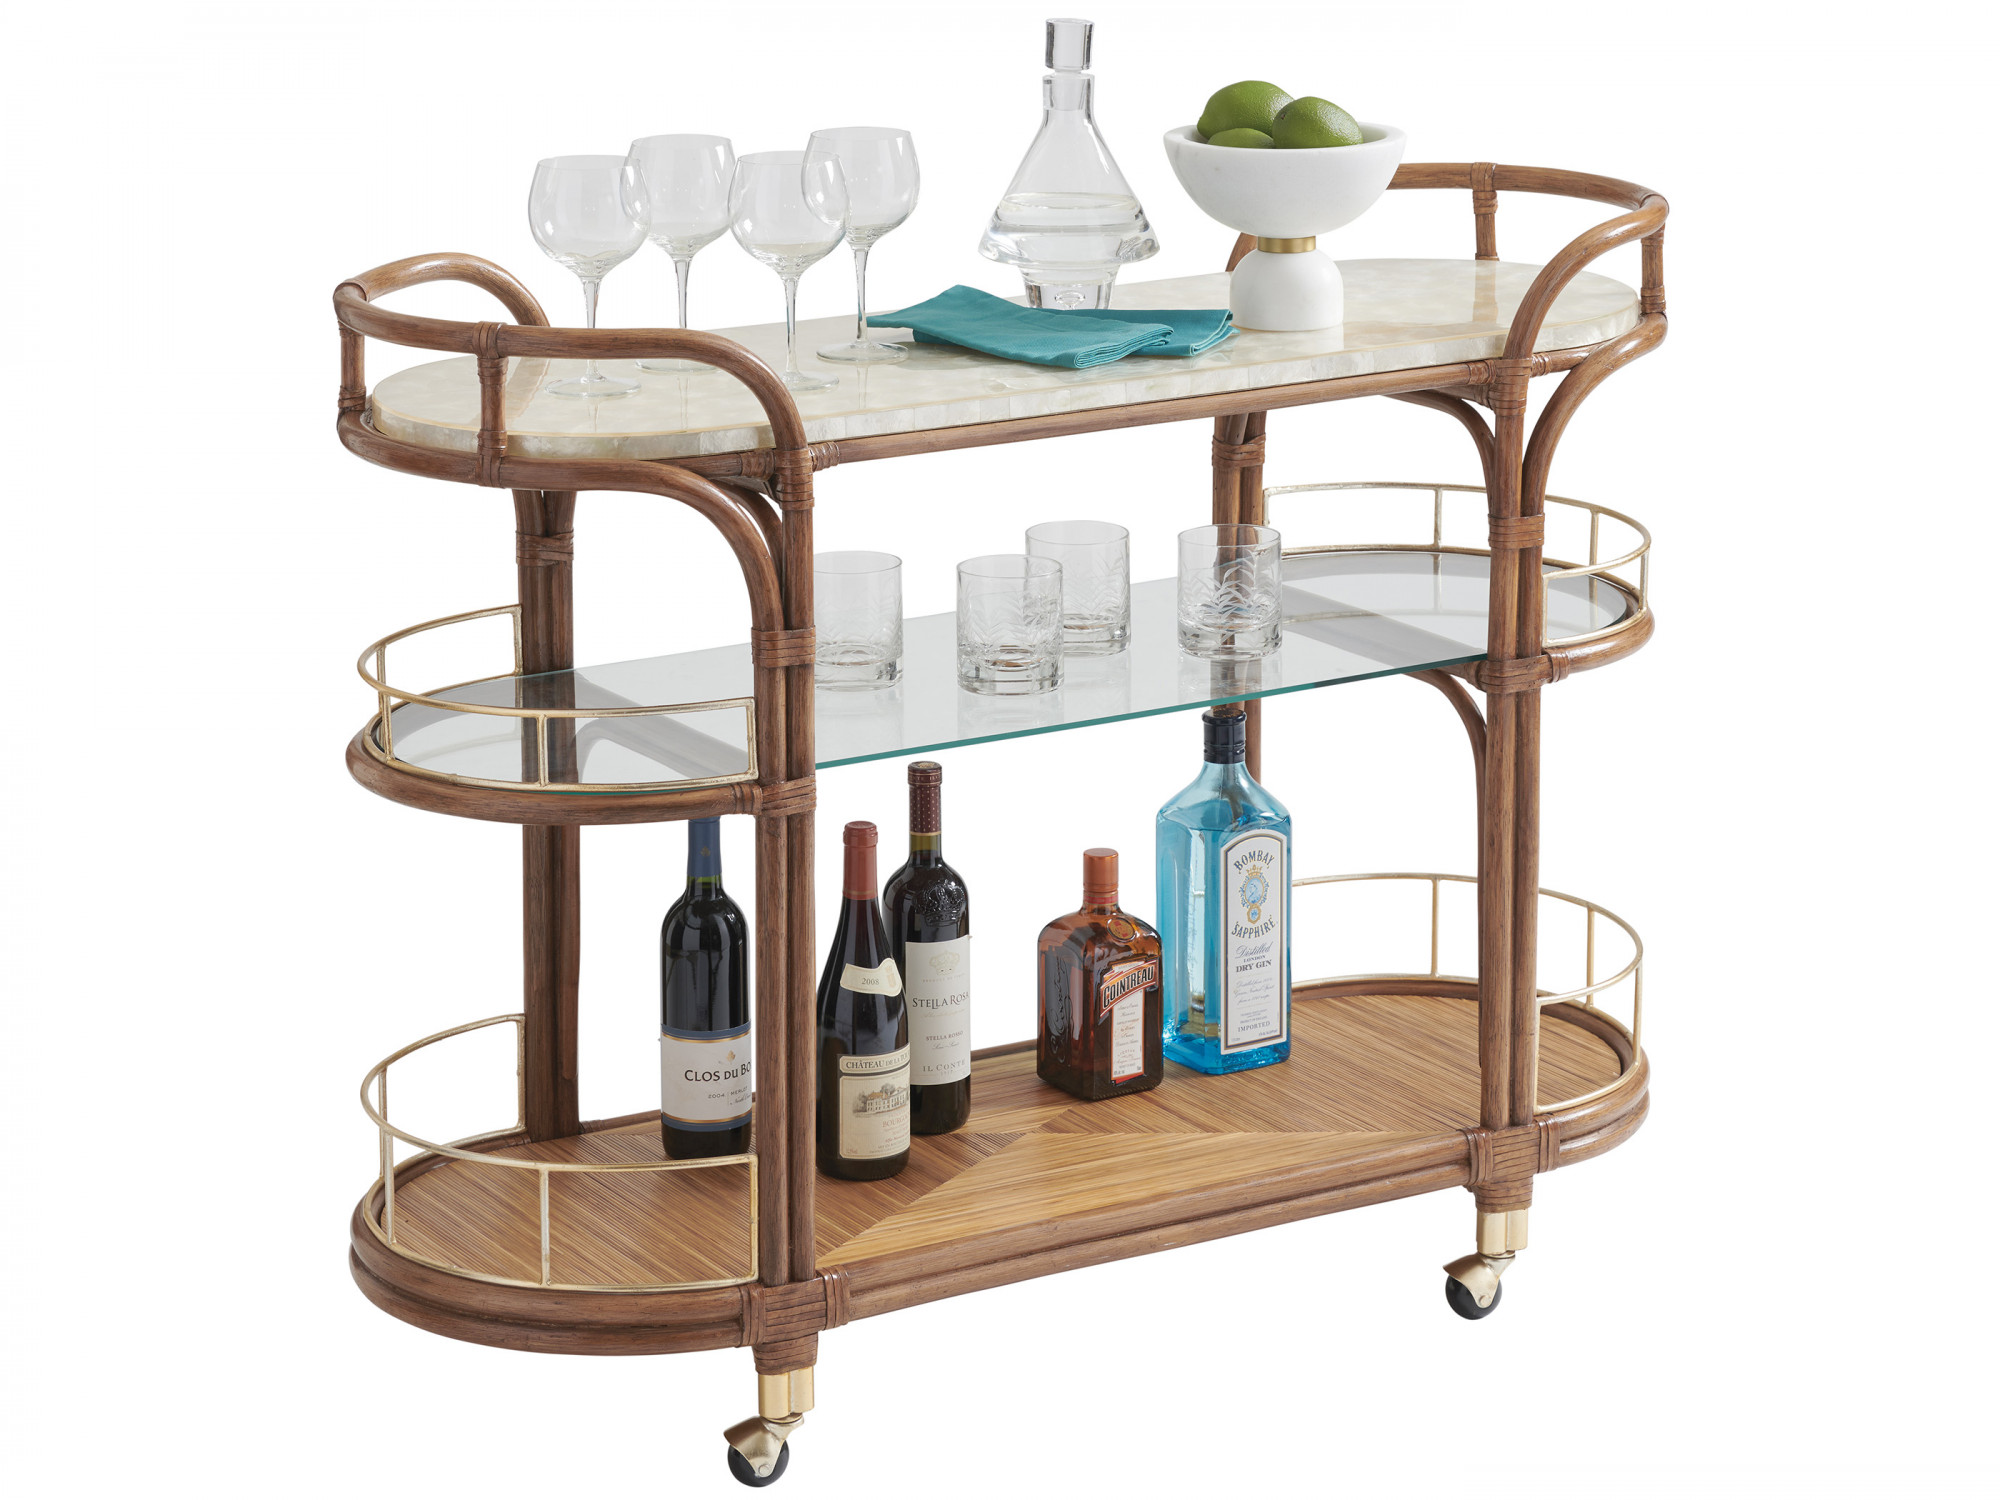 The Traveling Bar Cart